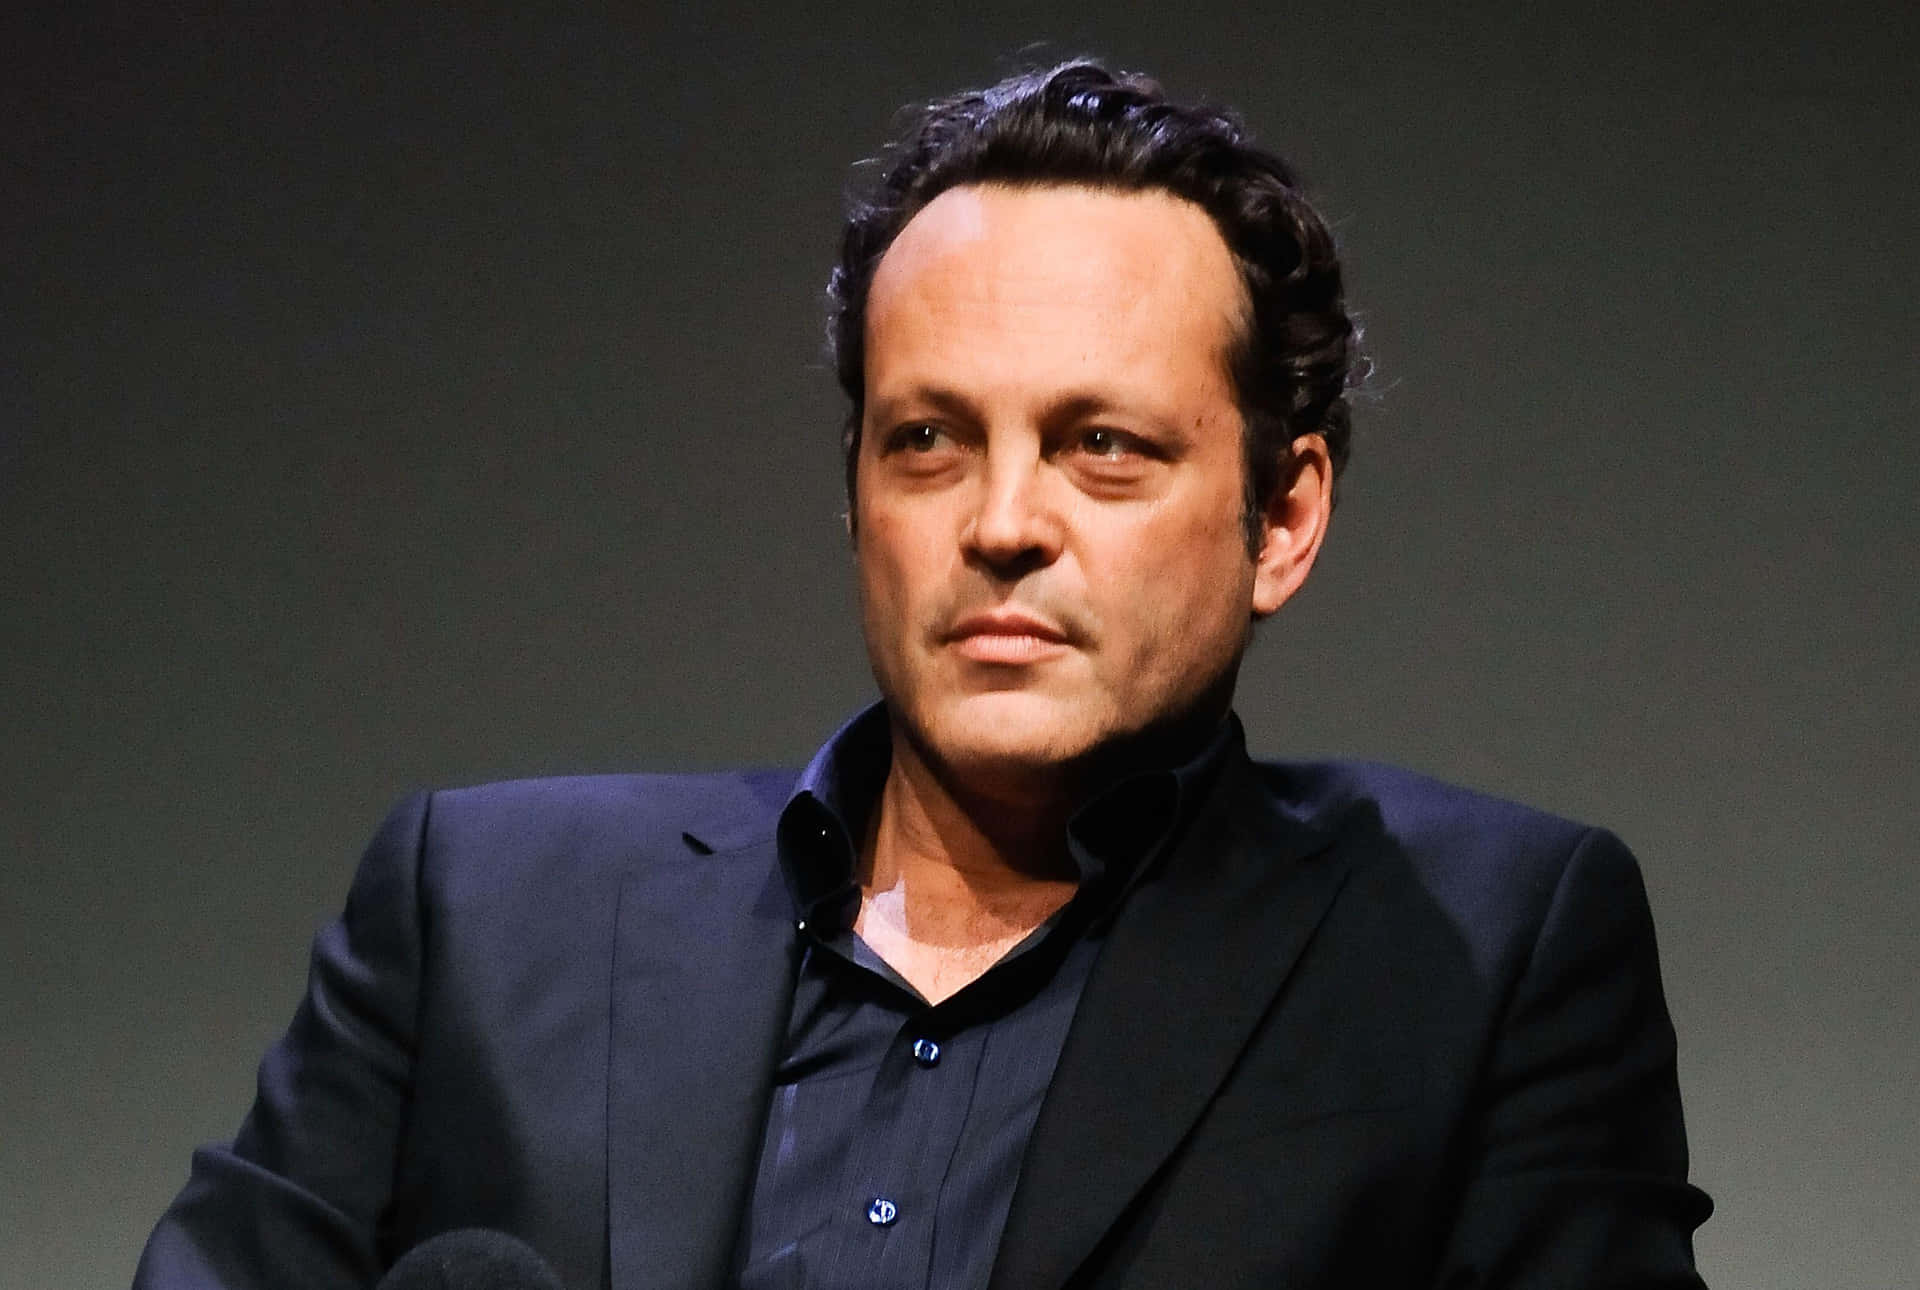 Vince Vaughn Smiling in a Stylish Suit Wallpaper